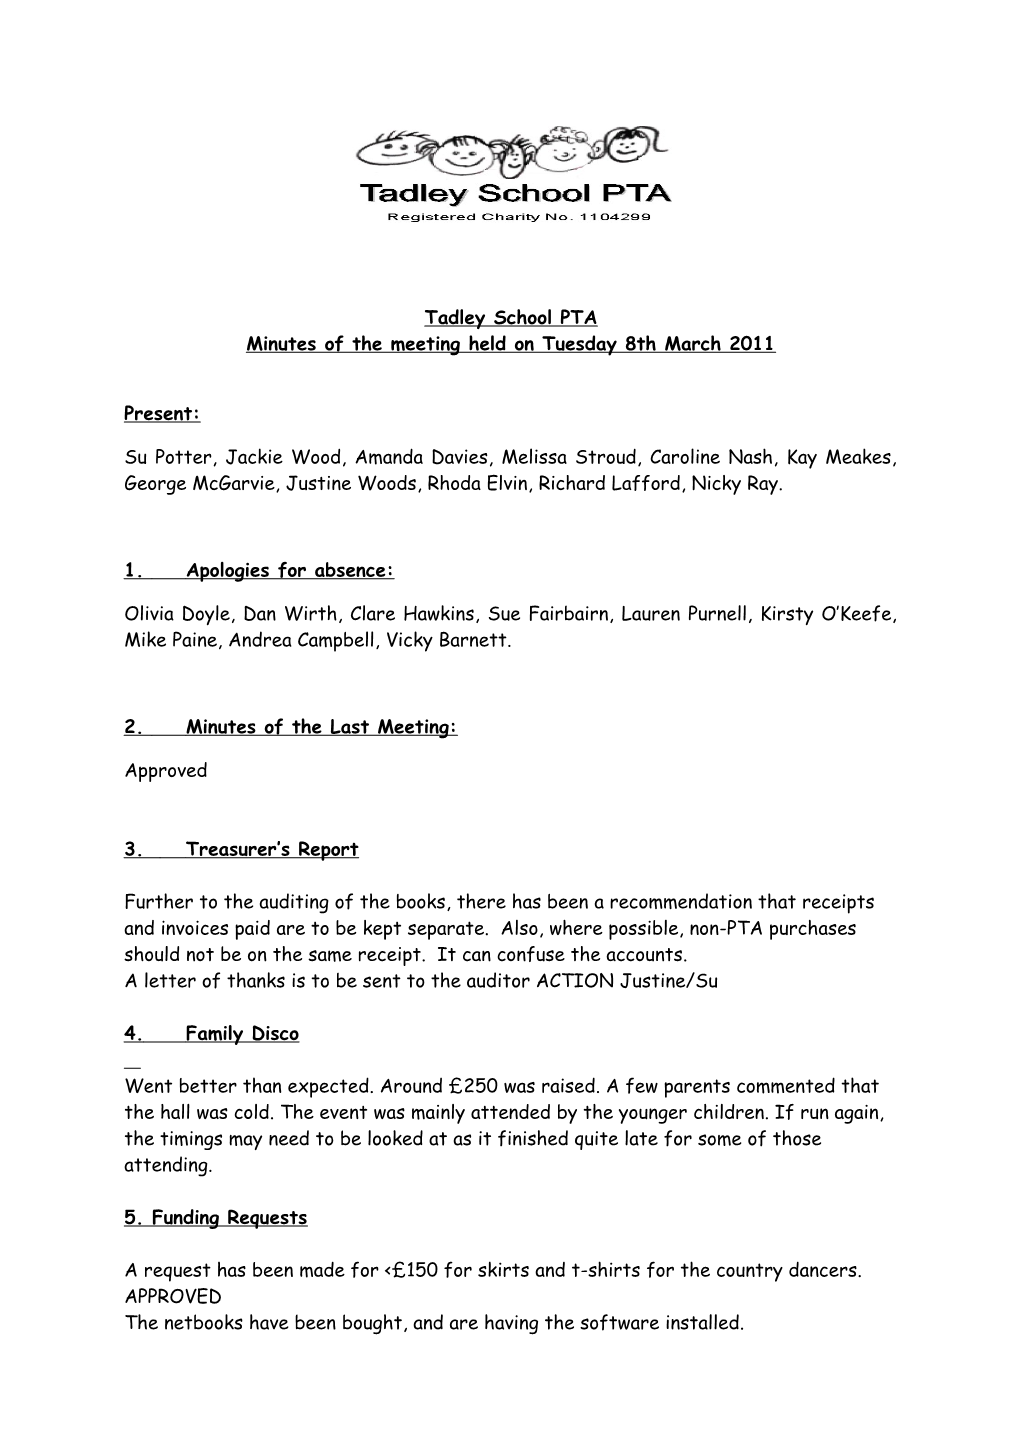 Minutes of the Meeting Held on Tuesday 8Thmarch2011